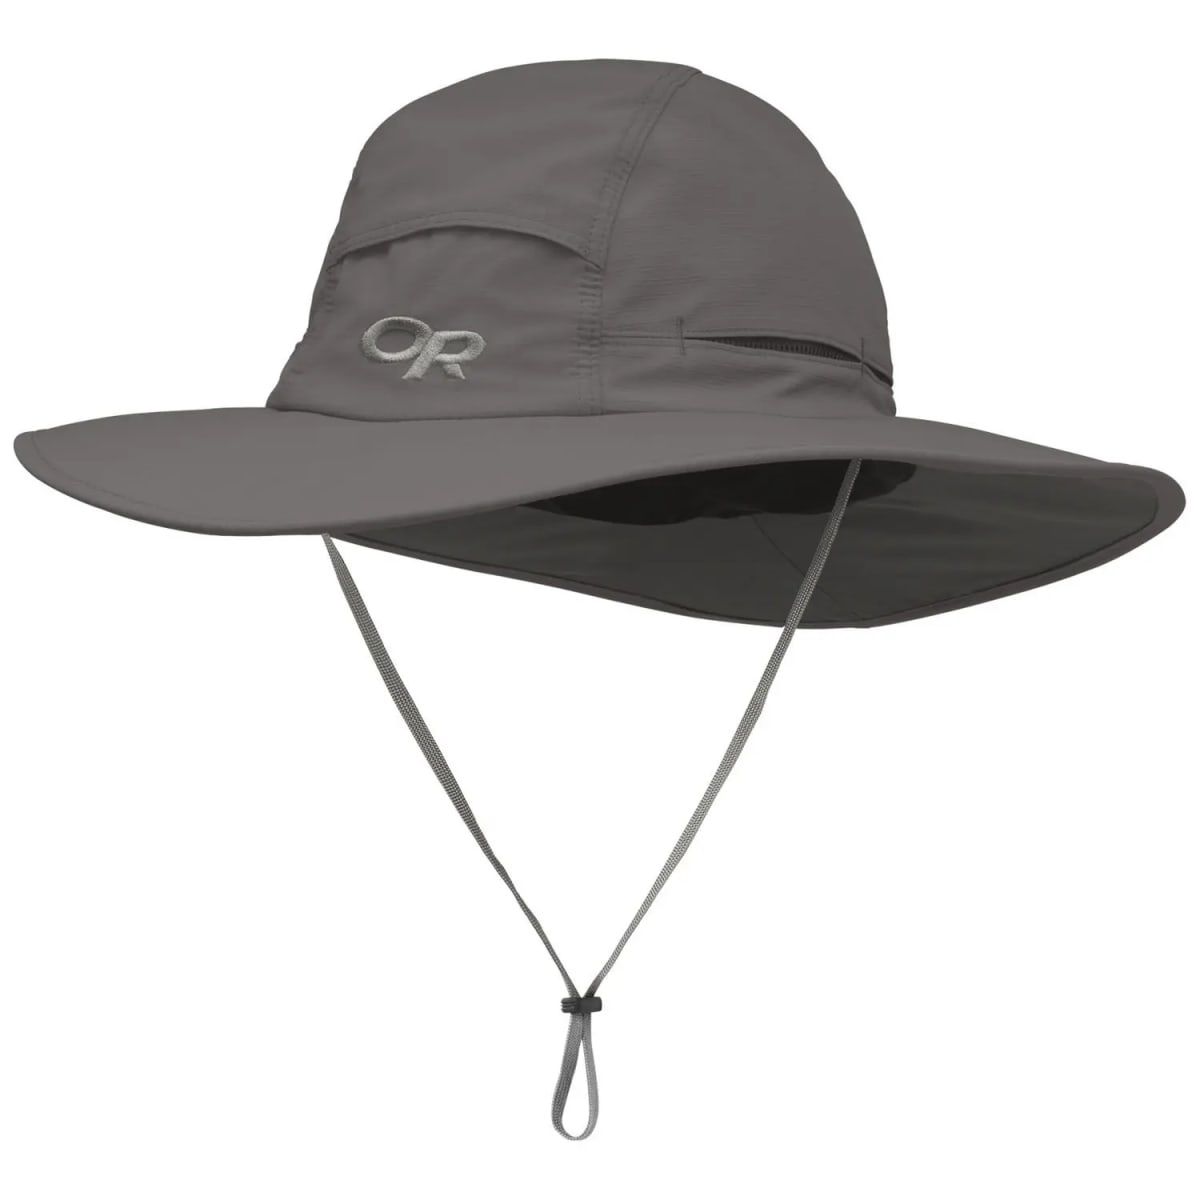 outdoor-research-sombriolet-sun-hat-pewter.jpg